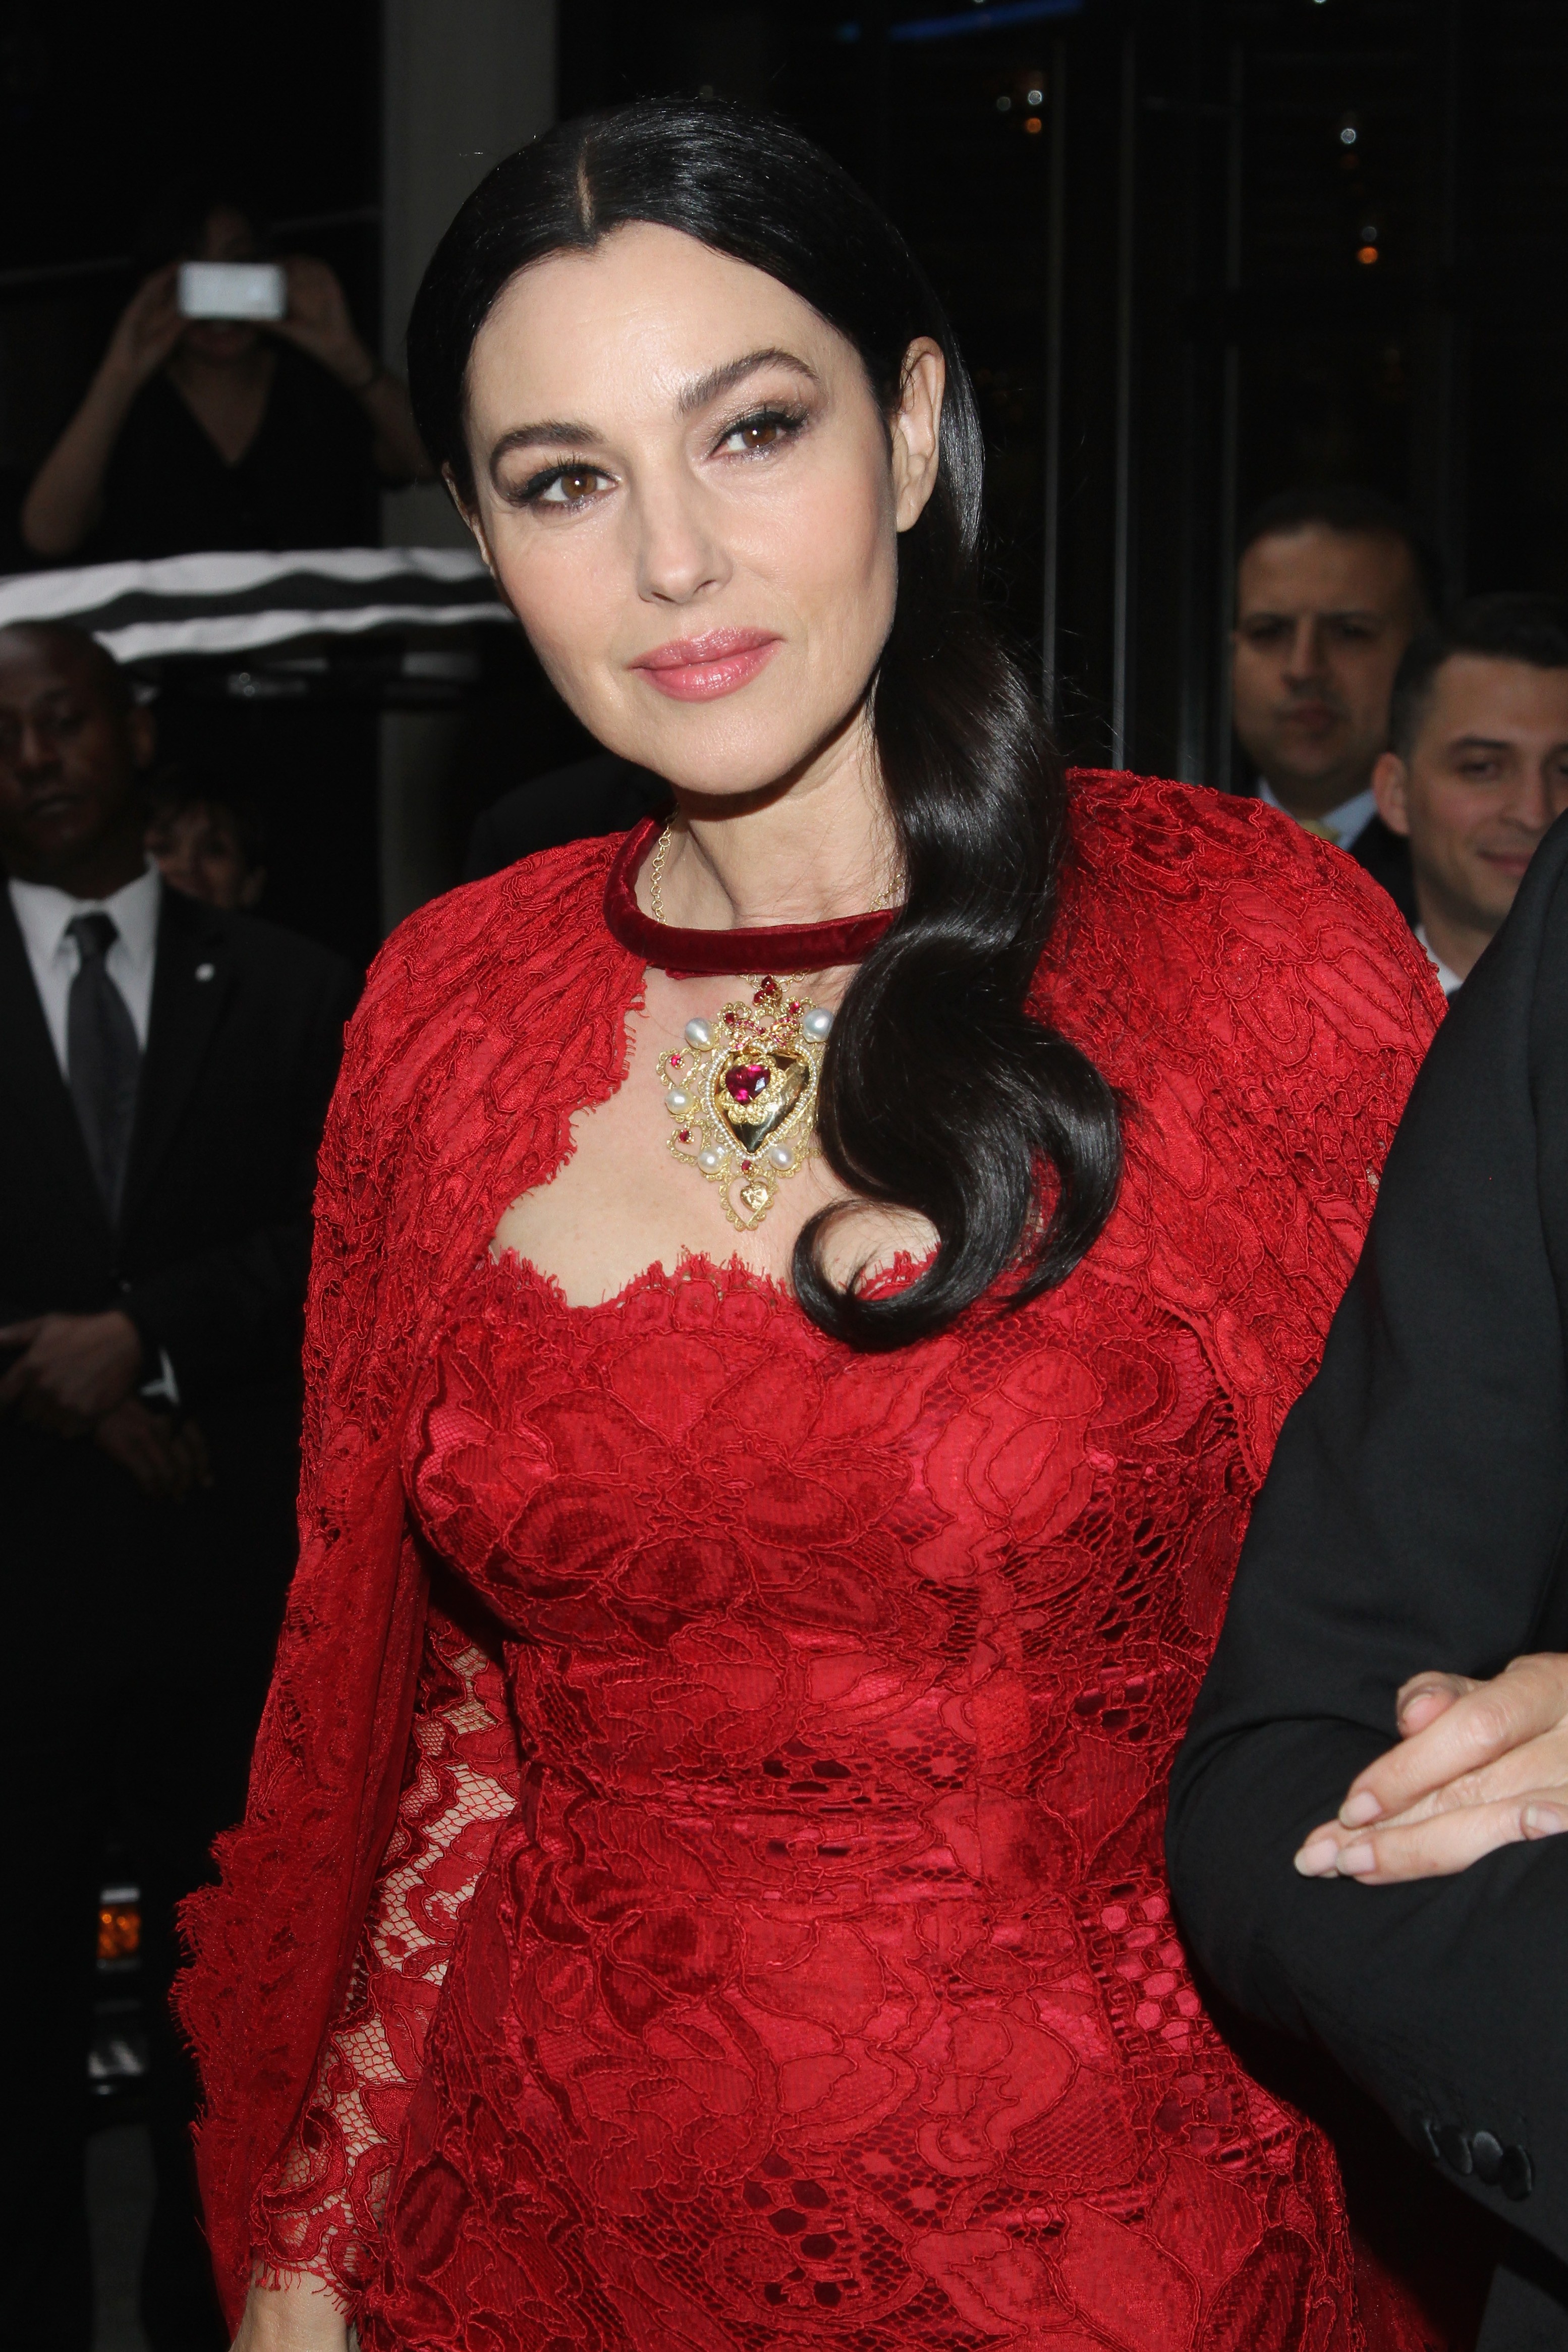 NEW YORK, NY - MAY 05: Actress Monica Bellucci departs the Mark Hotel for the Met Gala at the Metropolitan Museum of Art on May 5, 2014 in New York City.  (Photo by Rob Kim/Getty Images for The Mark Hotel) (Foto: Editora Globo)